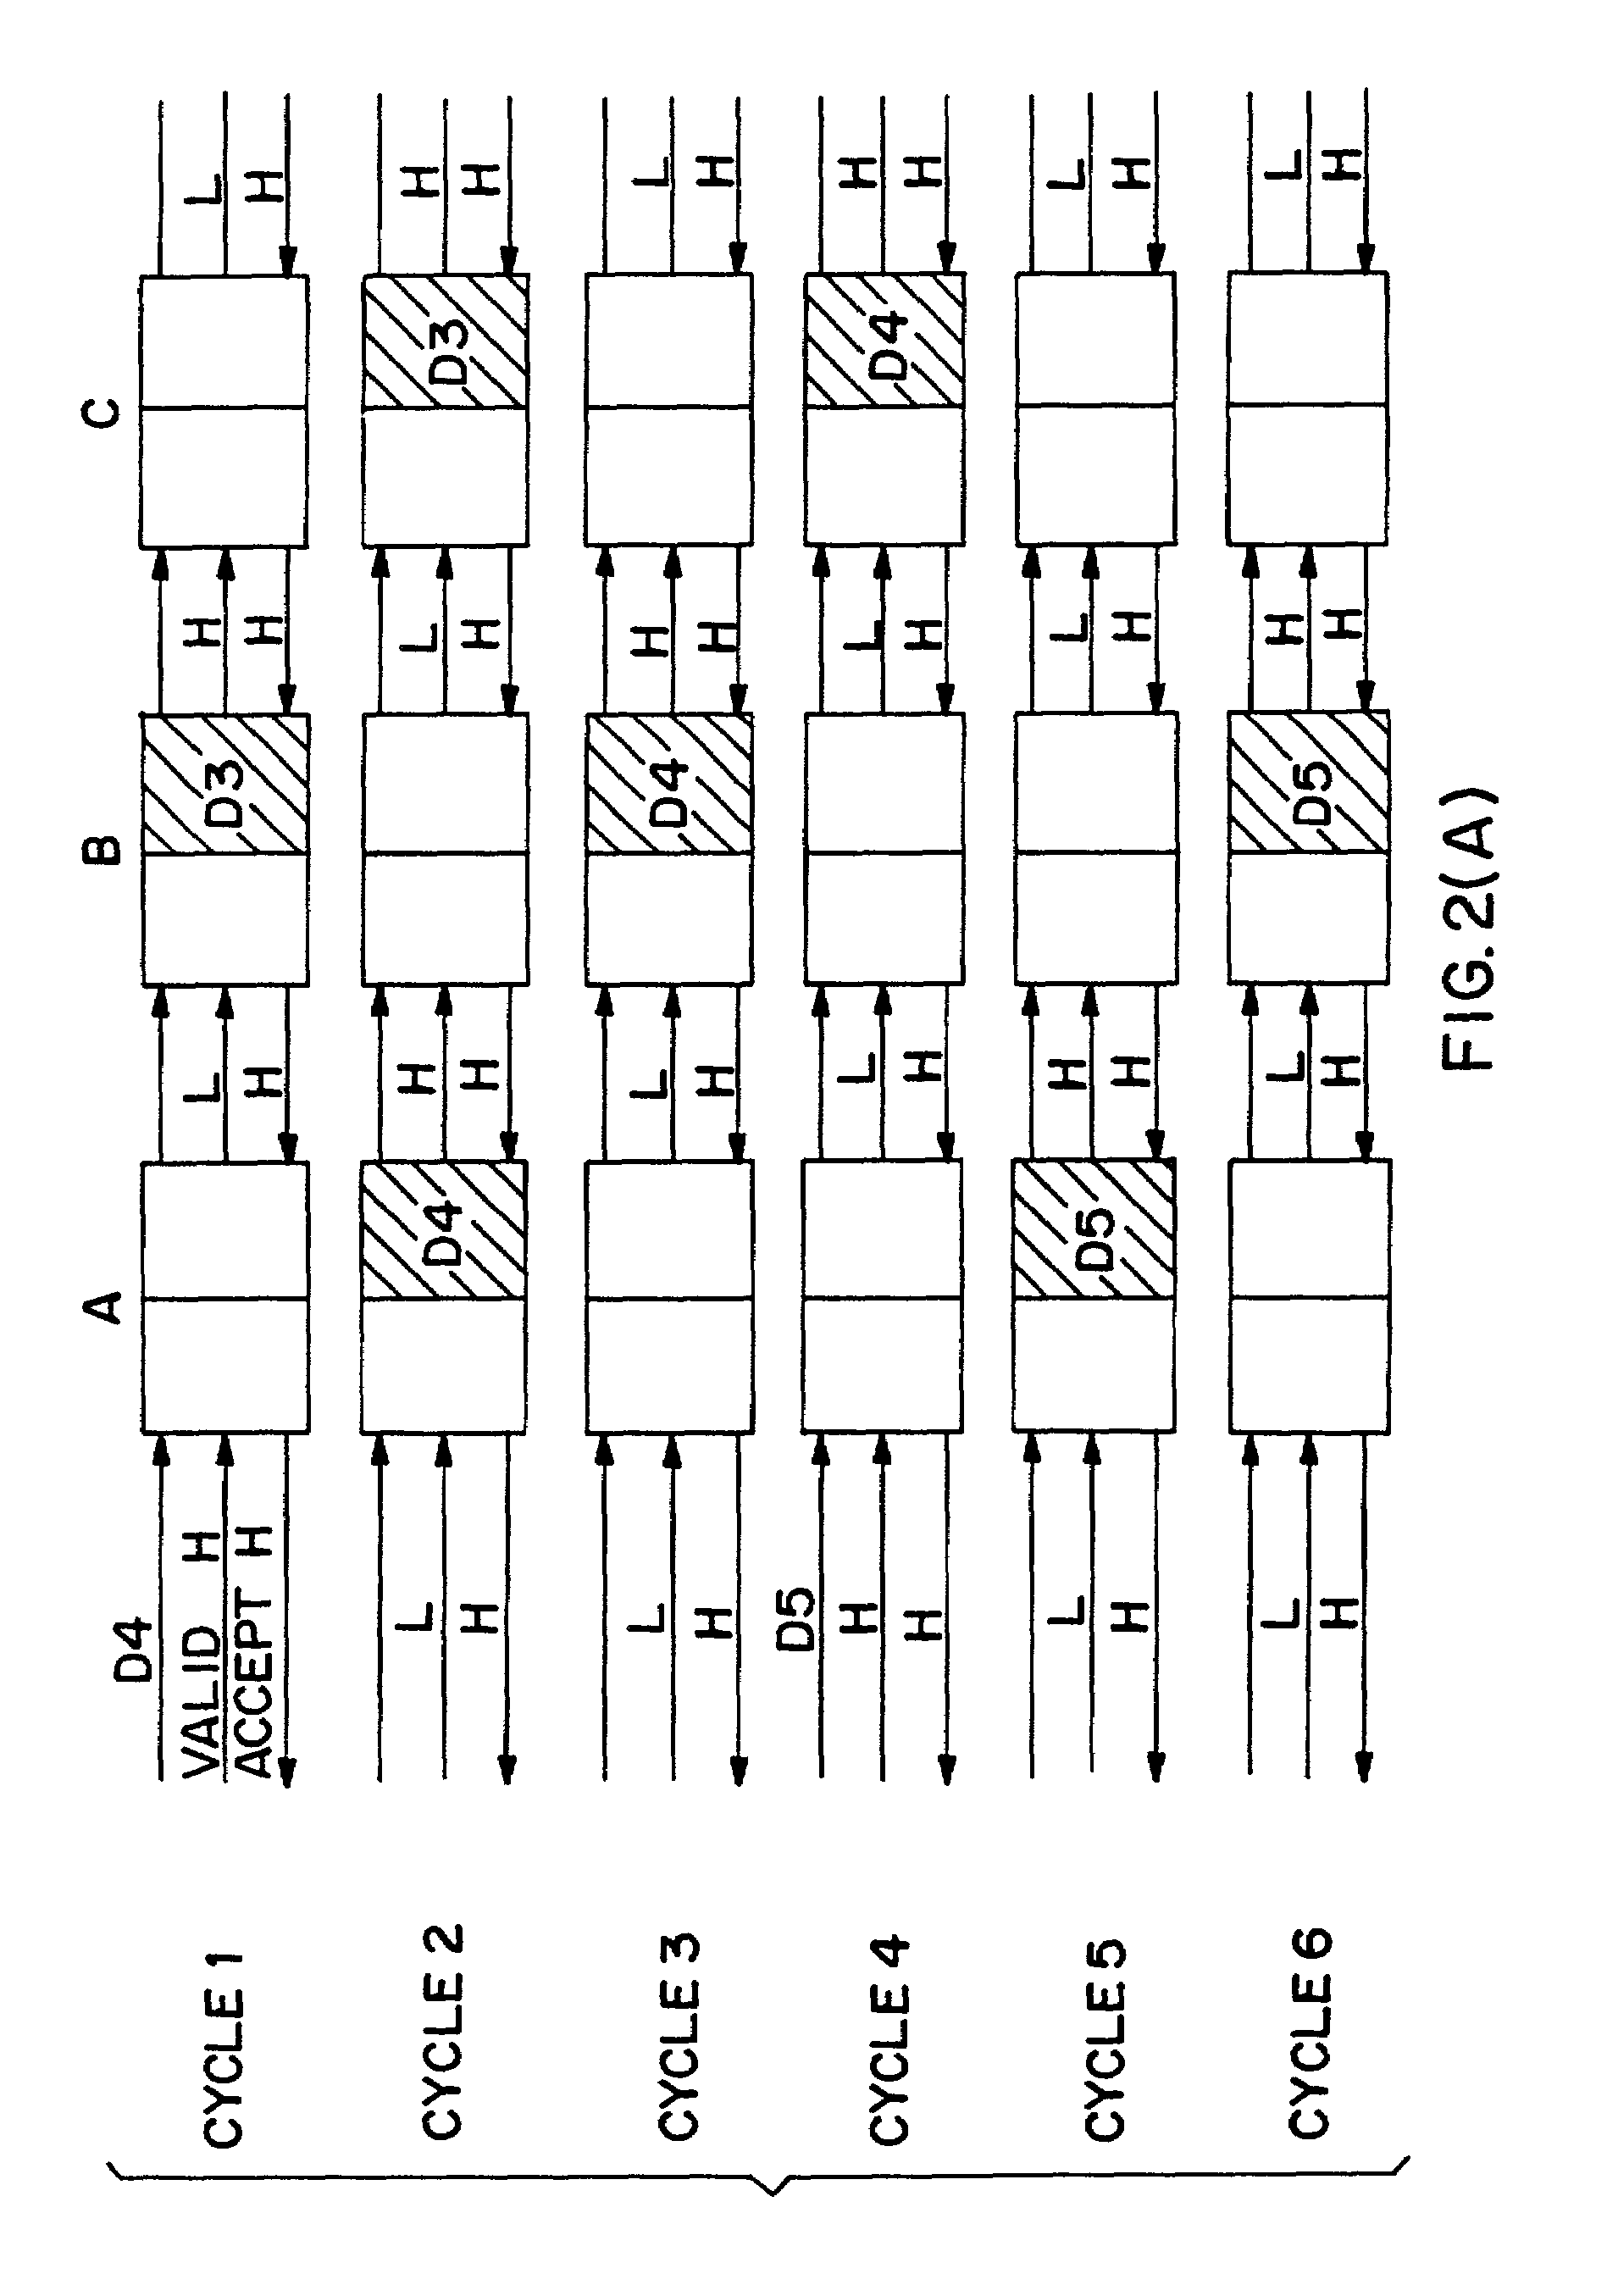 Multistandard video decoder and decompression system for processing encoded bit streams including a video formatter and methods relating thereto